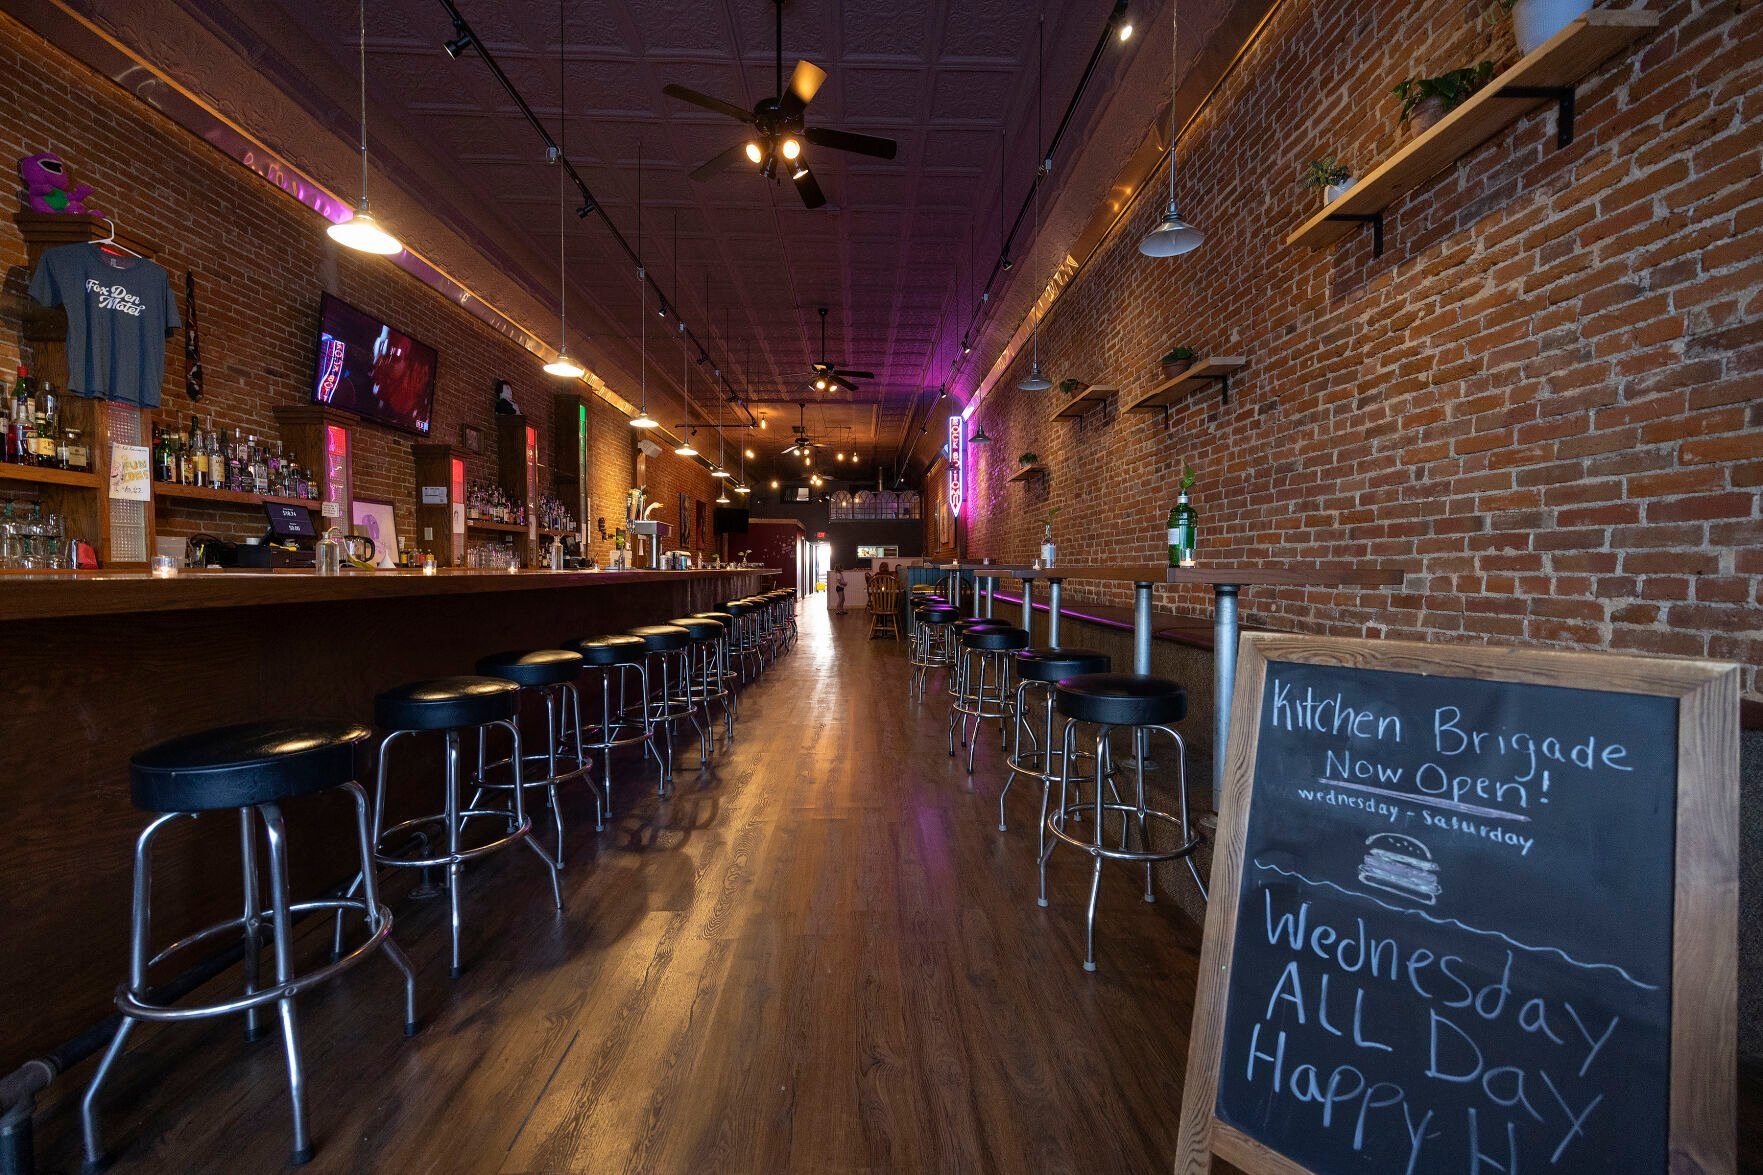 Interior of the Fox Den and Kitchen Brigade in Dubuque on Wednesday, April 12, 2023.    PHOTO CREDIT: Stephen Gassman